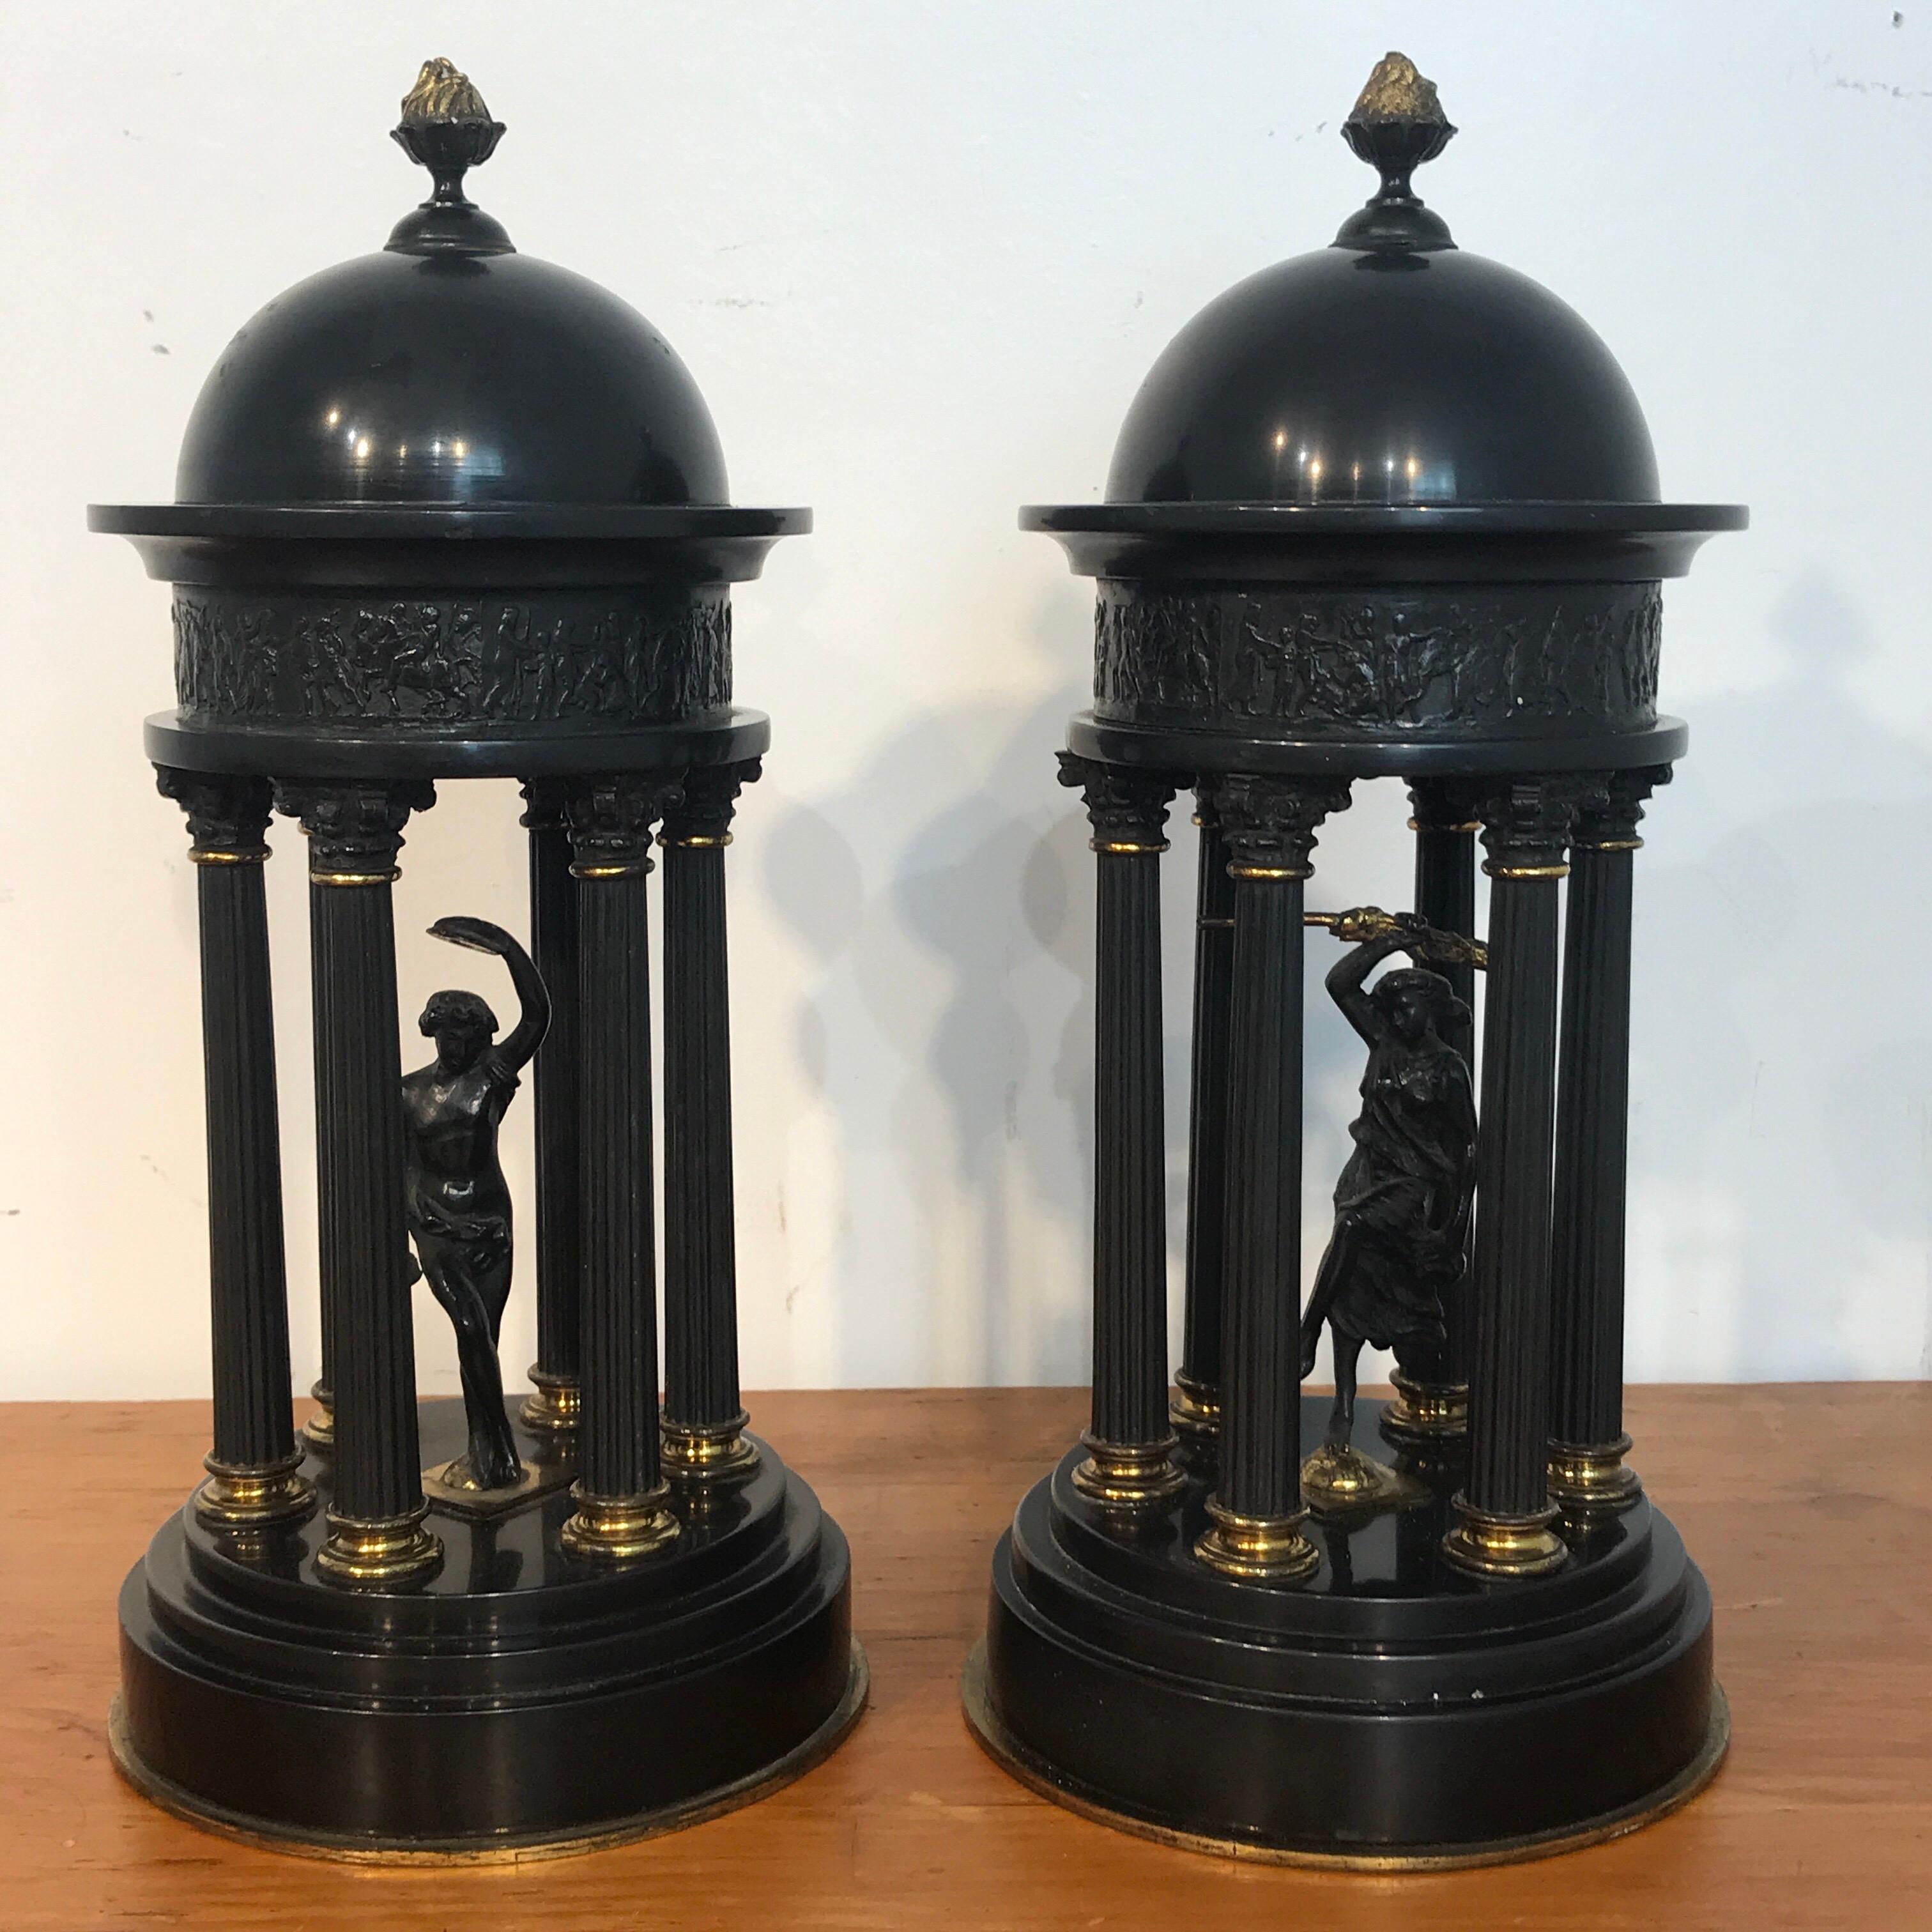 Pair of Grand Tour bronze and marble models of Tempiettos, each one with patinated and gilt bronze columns with a central classical deity figure, the domes and bases are made of specimen quality Belgian black marble.